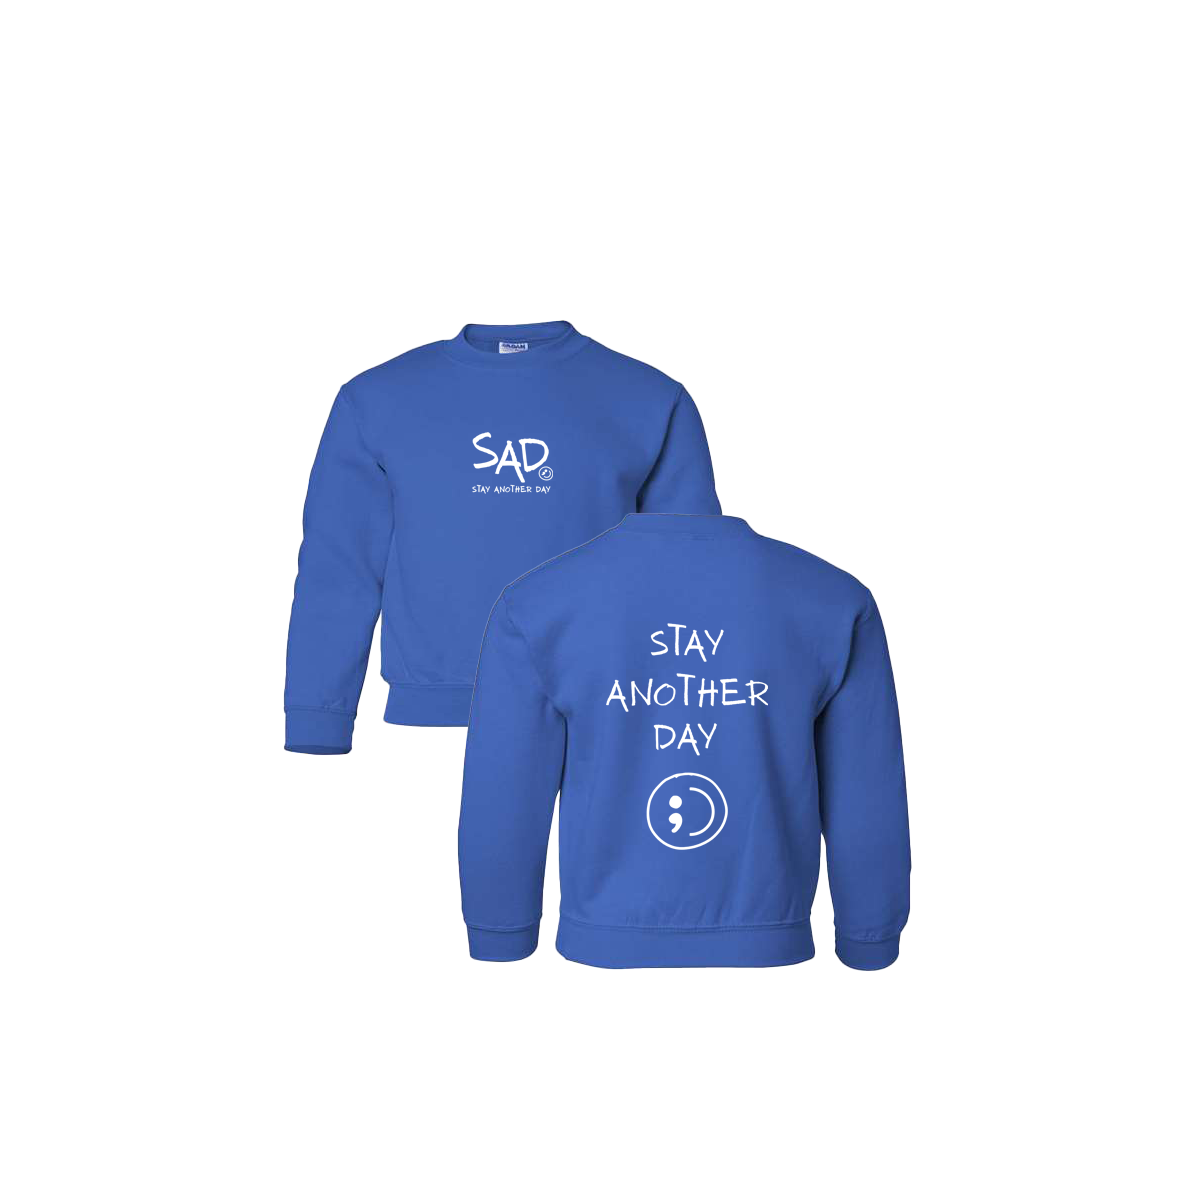 Stay Another Day Screen Printed Royal Blue Youth Crewneck